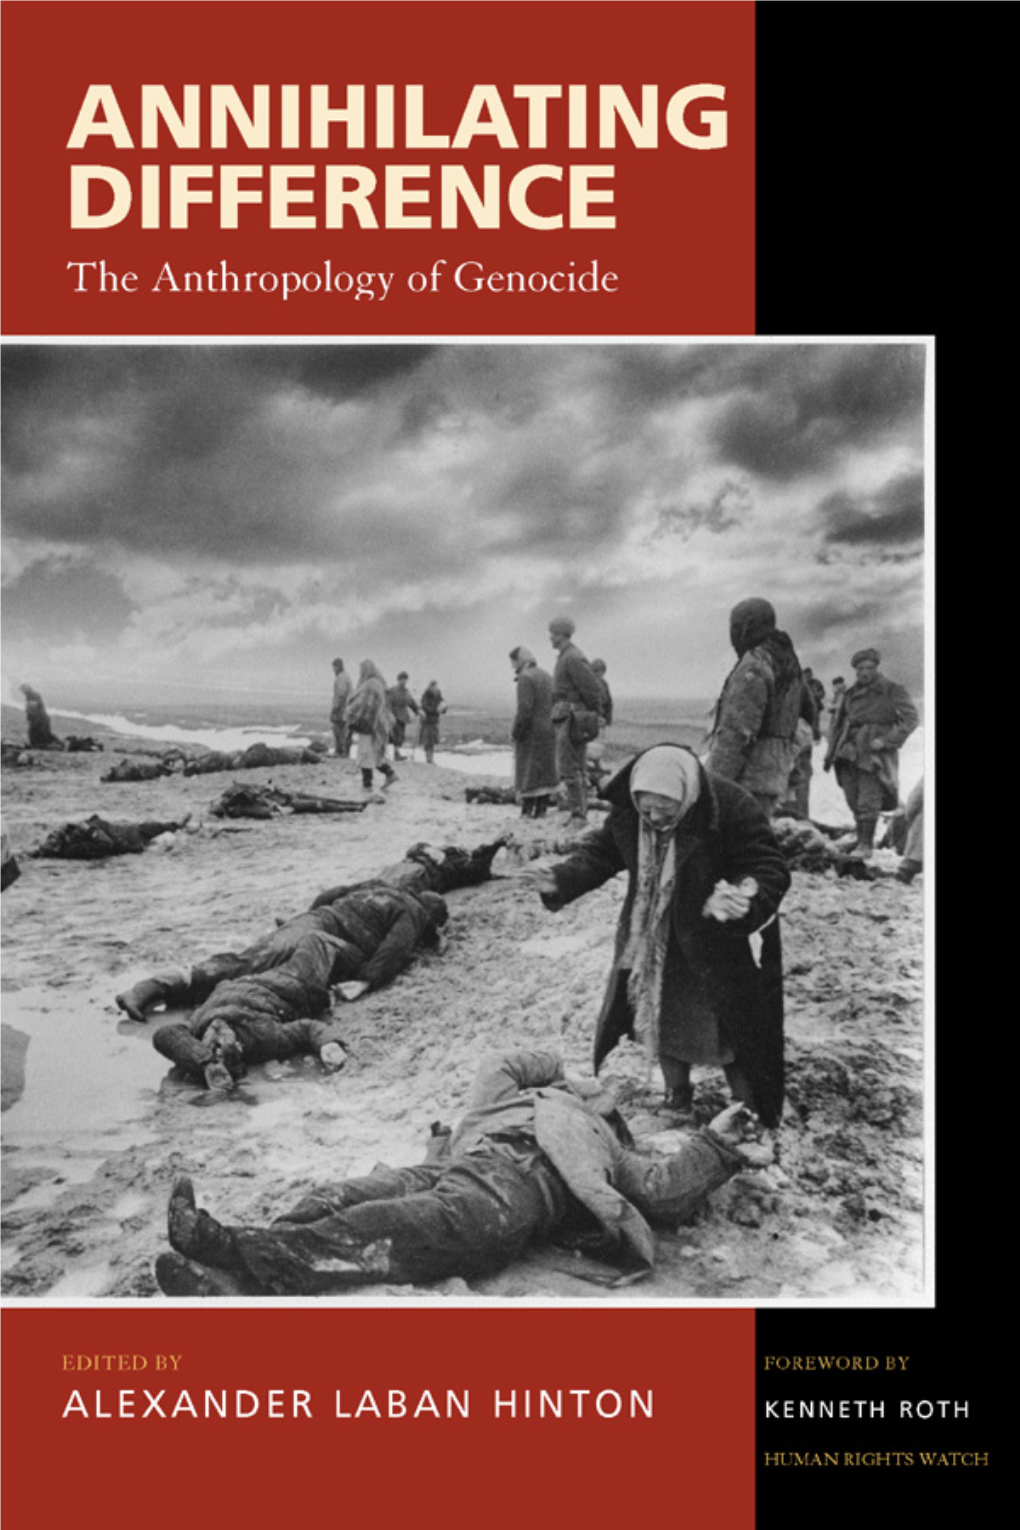 Annihilating Difference: the Anthropology of Genocide, Edited by Alexander Laban Hinton 